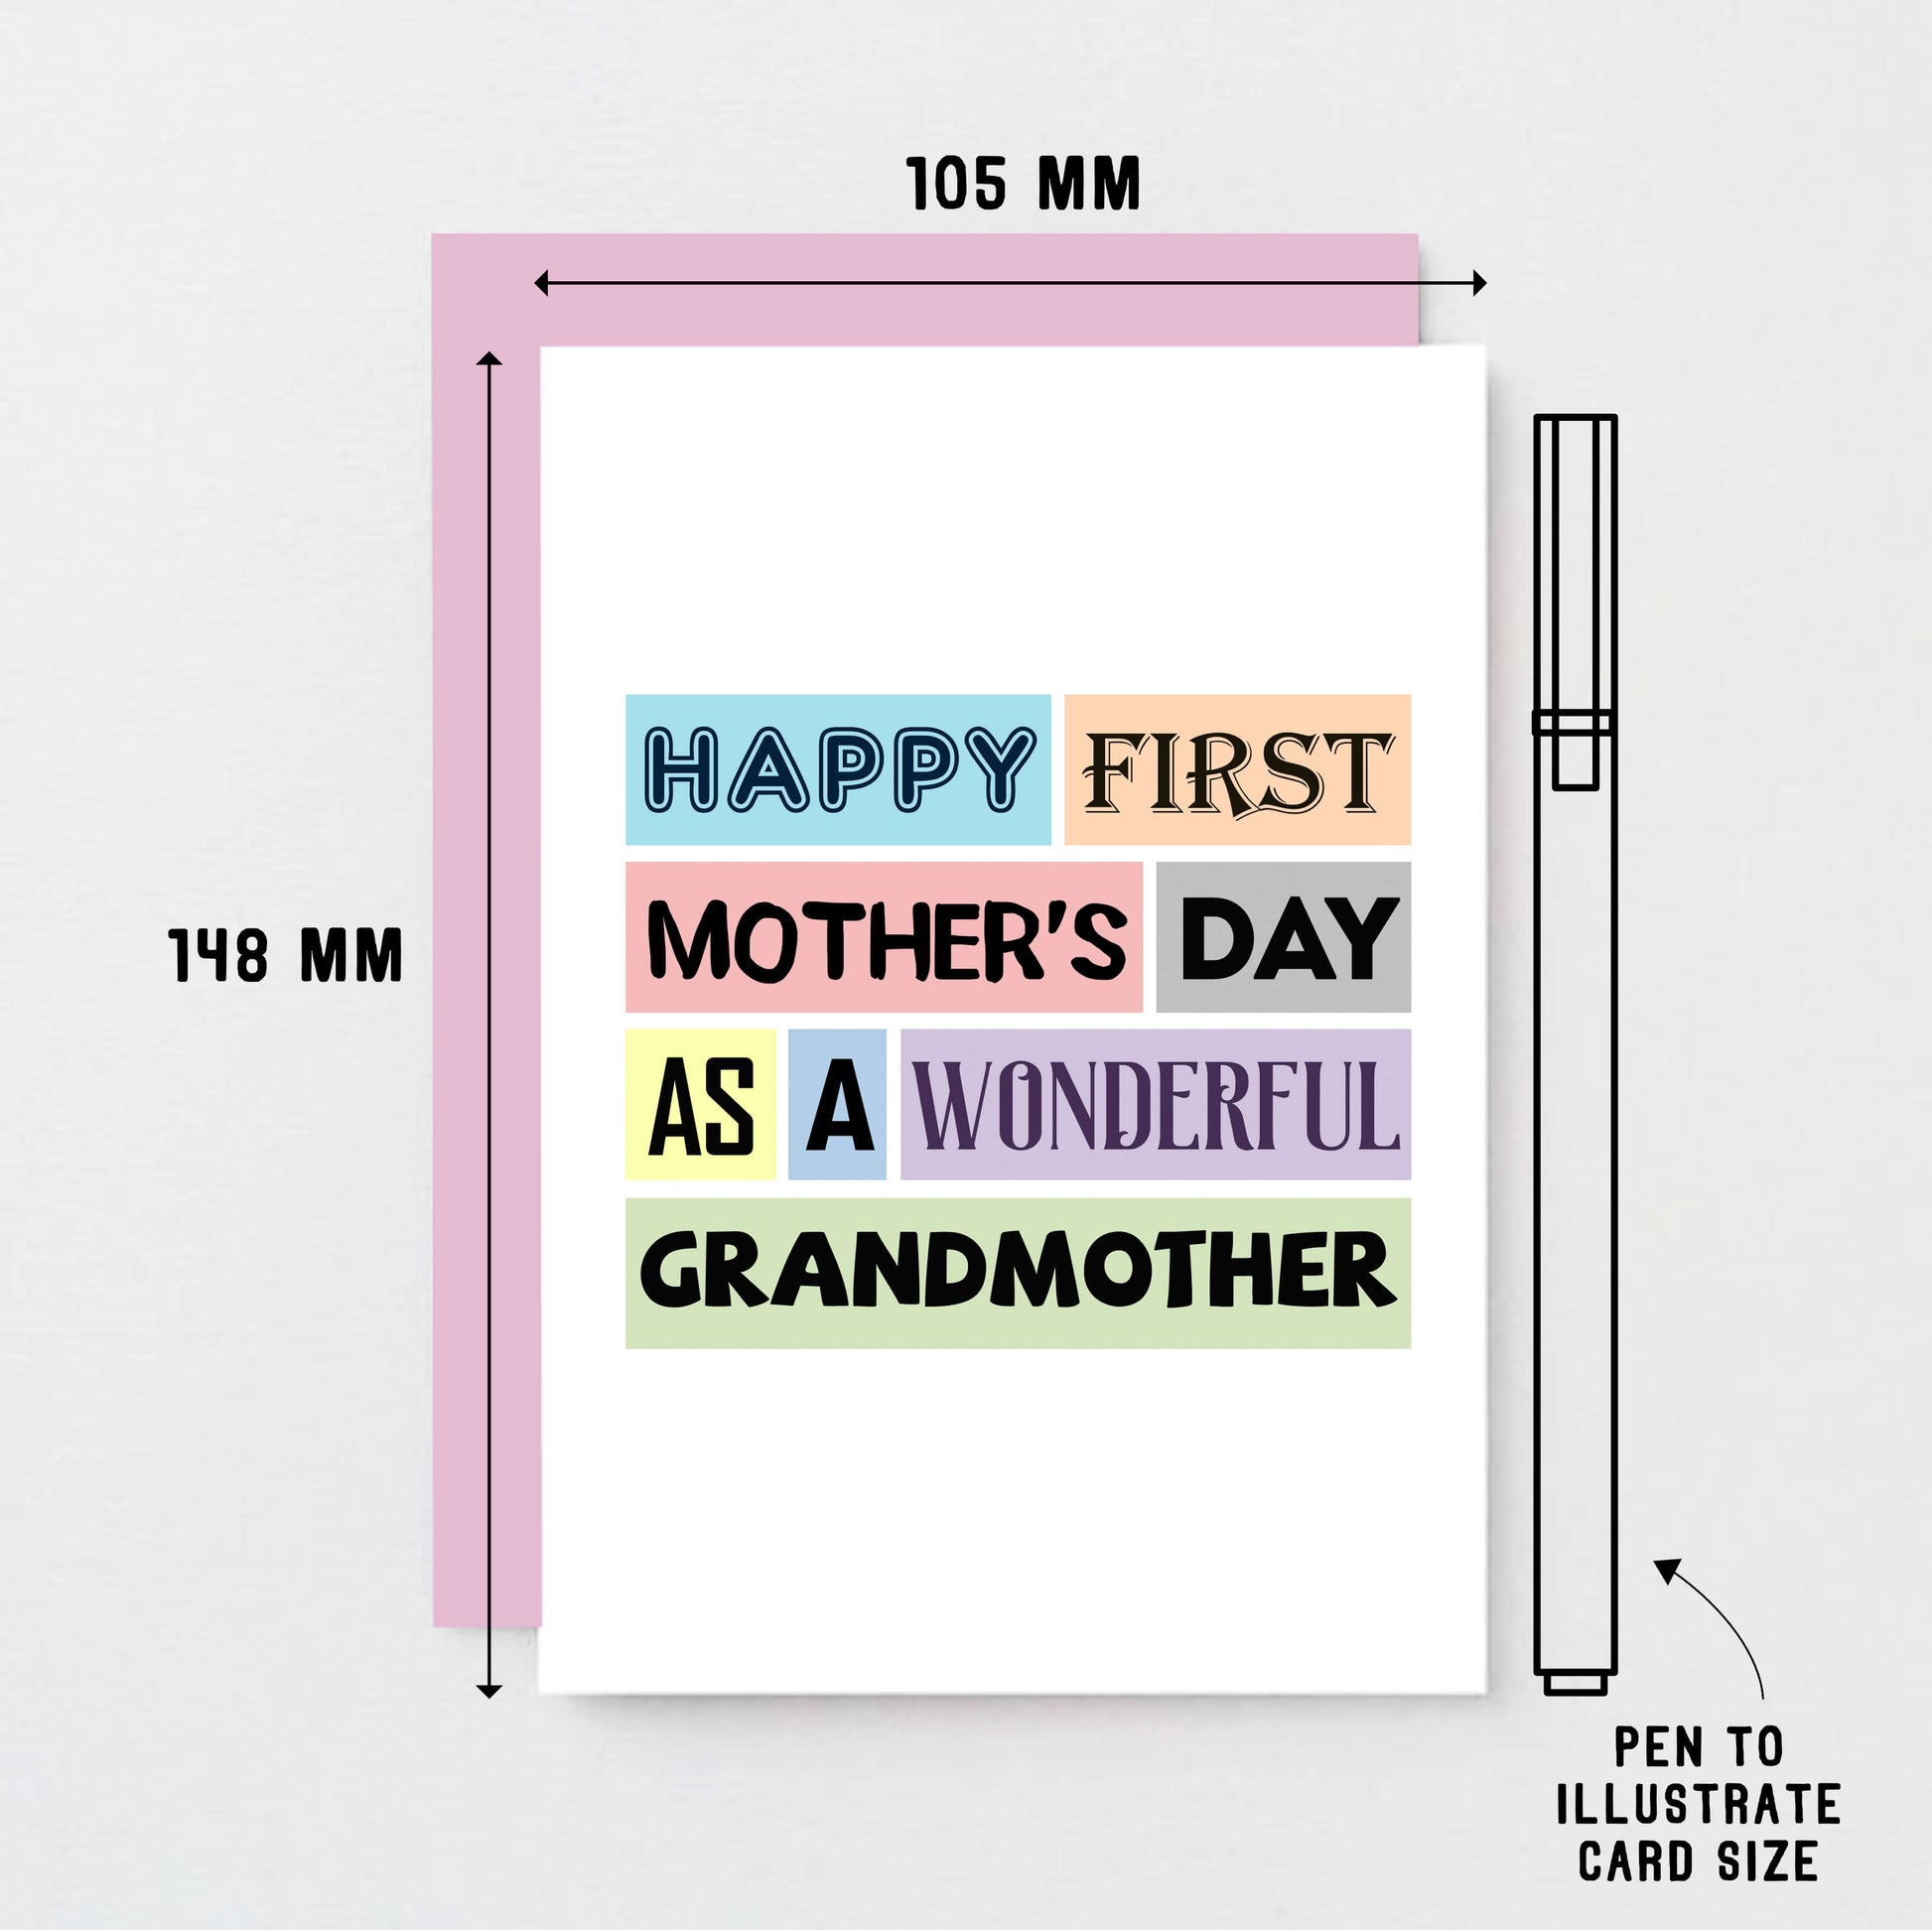 Grandmother Mother's Day Card by SixElevenCreations. Reads Happy First Mother's Day as a wonderful grandmother. Product Code SEM0001A6